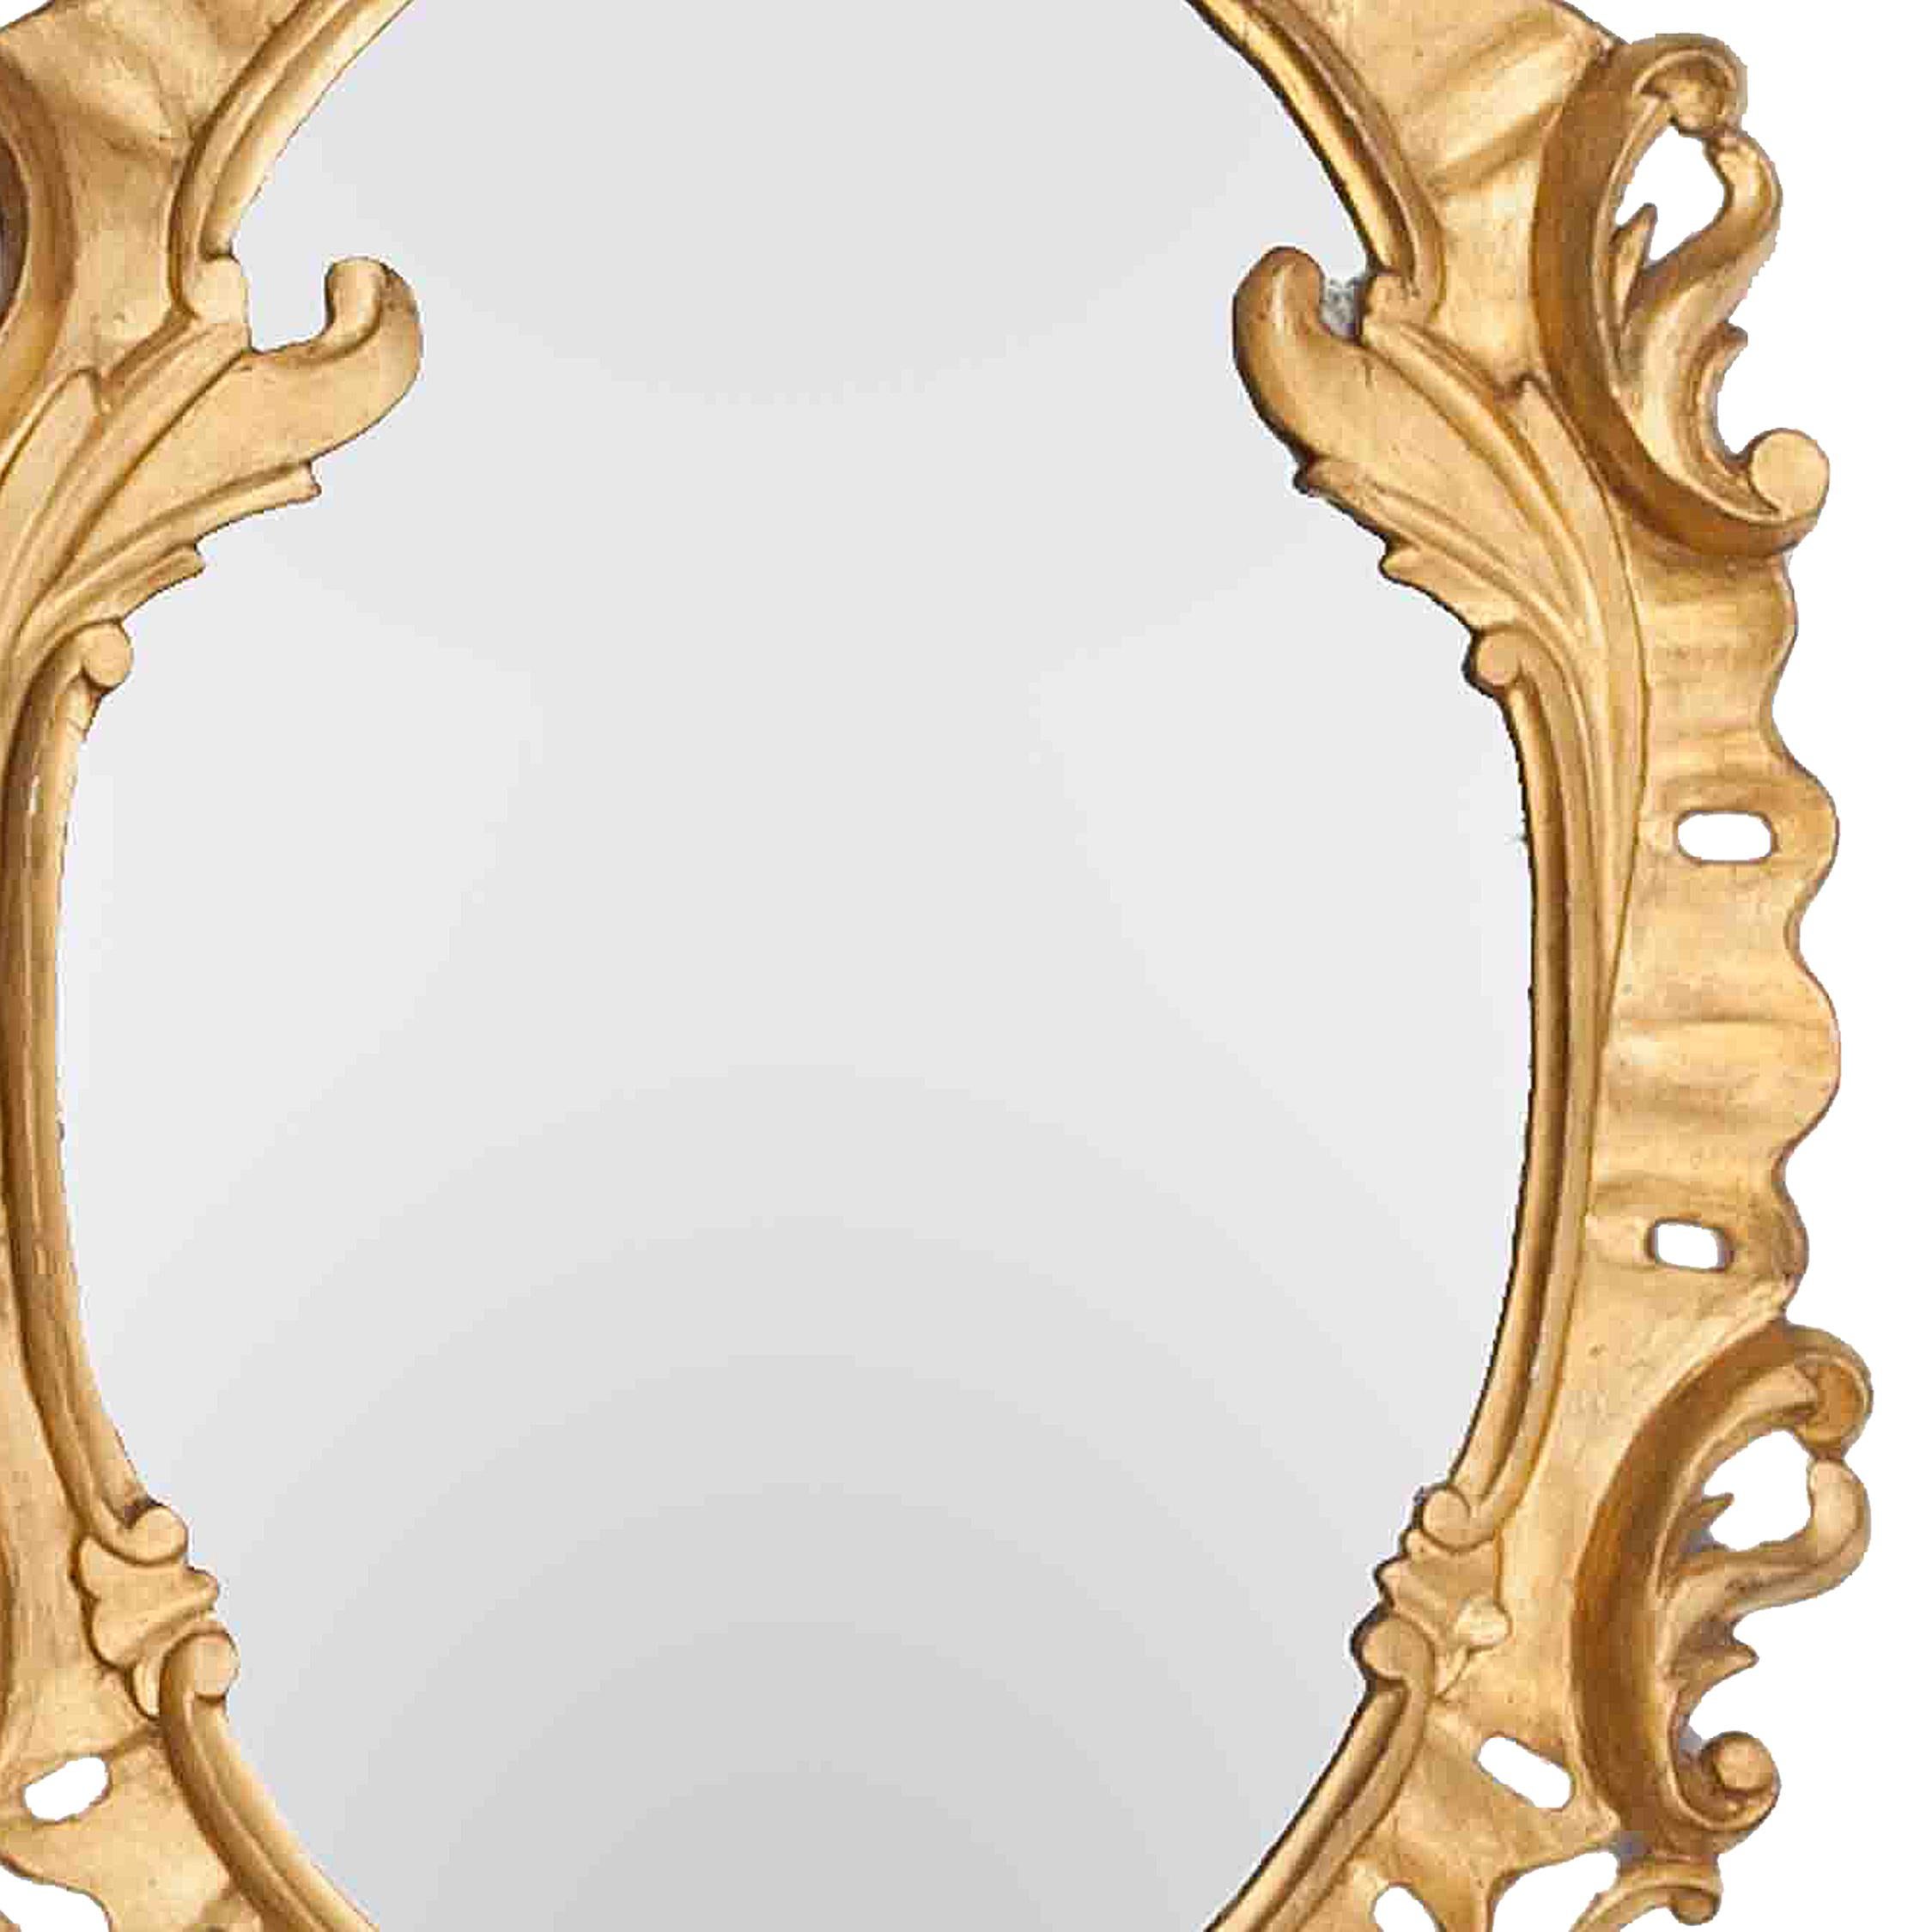 Rococo Early 19th Century Irish Gilt Oval Mirror with C-Scrolls and Acanthus Leaves